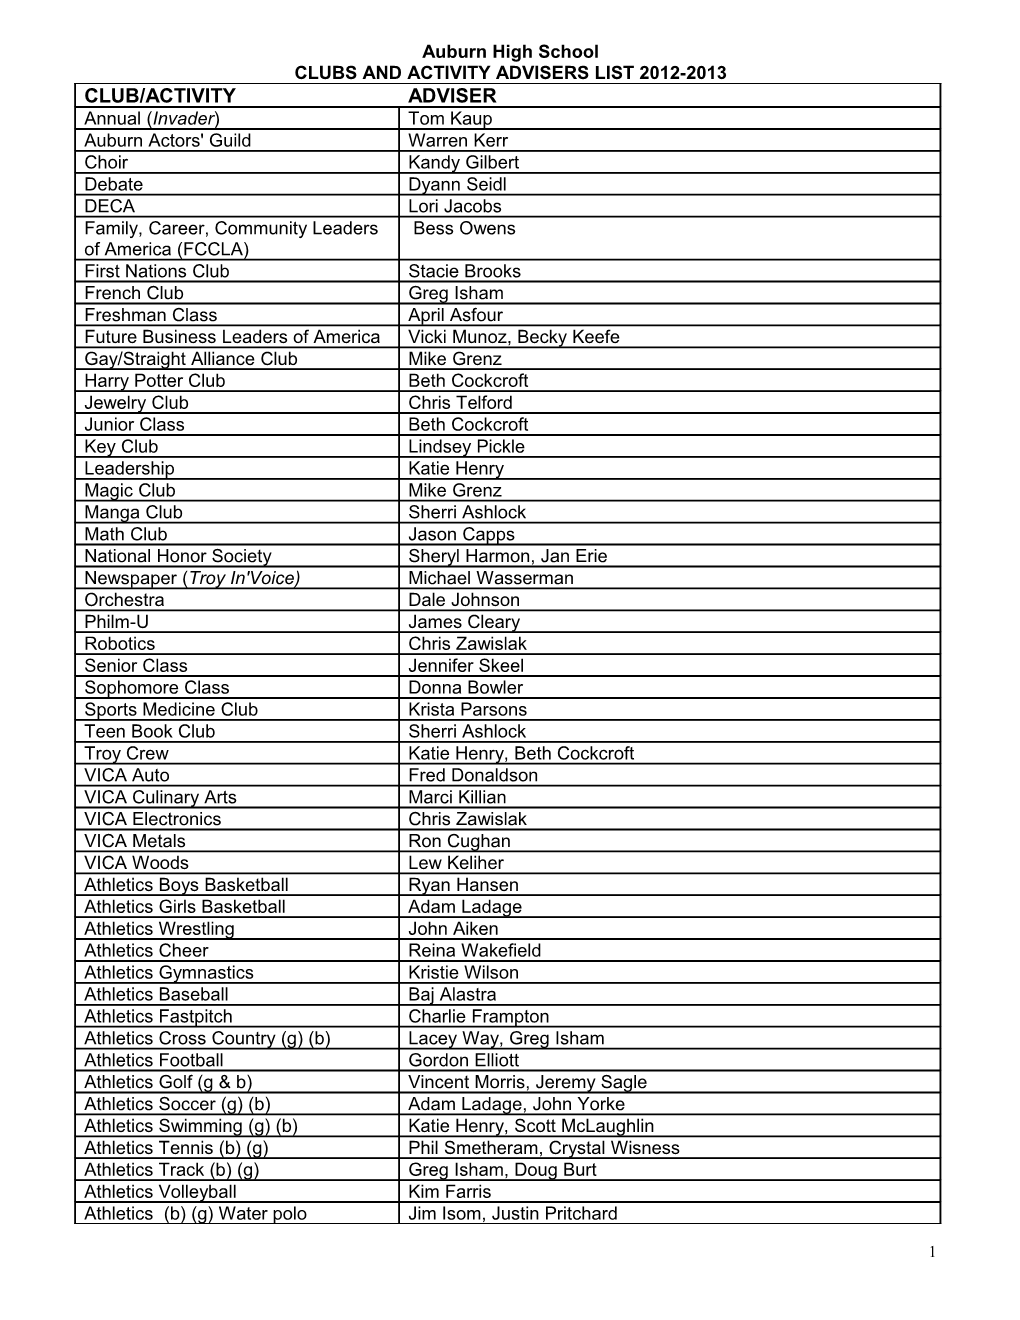 Clubs and Activity Advisers List2012-2013